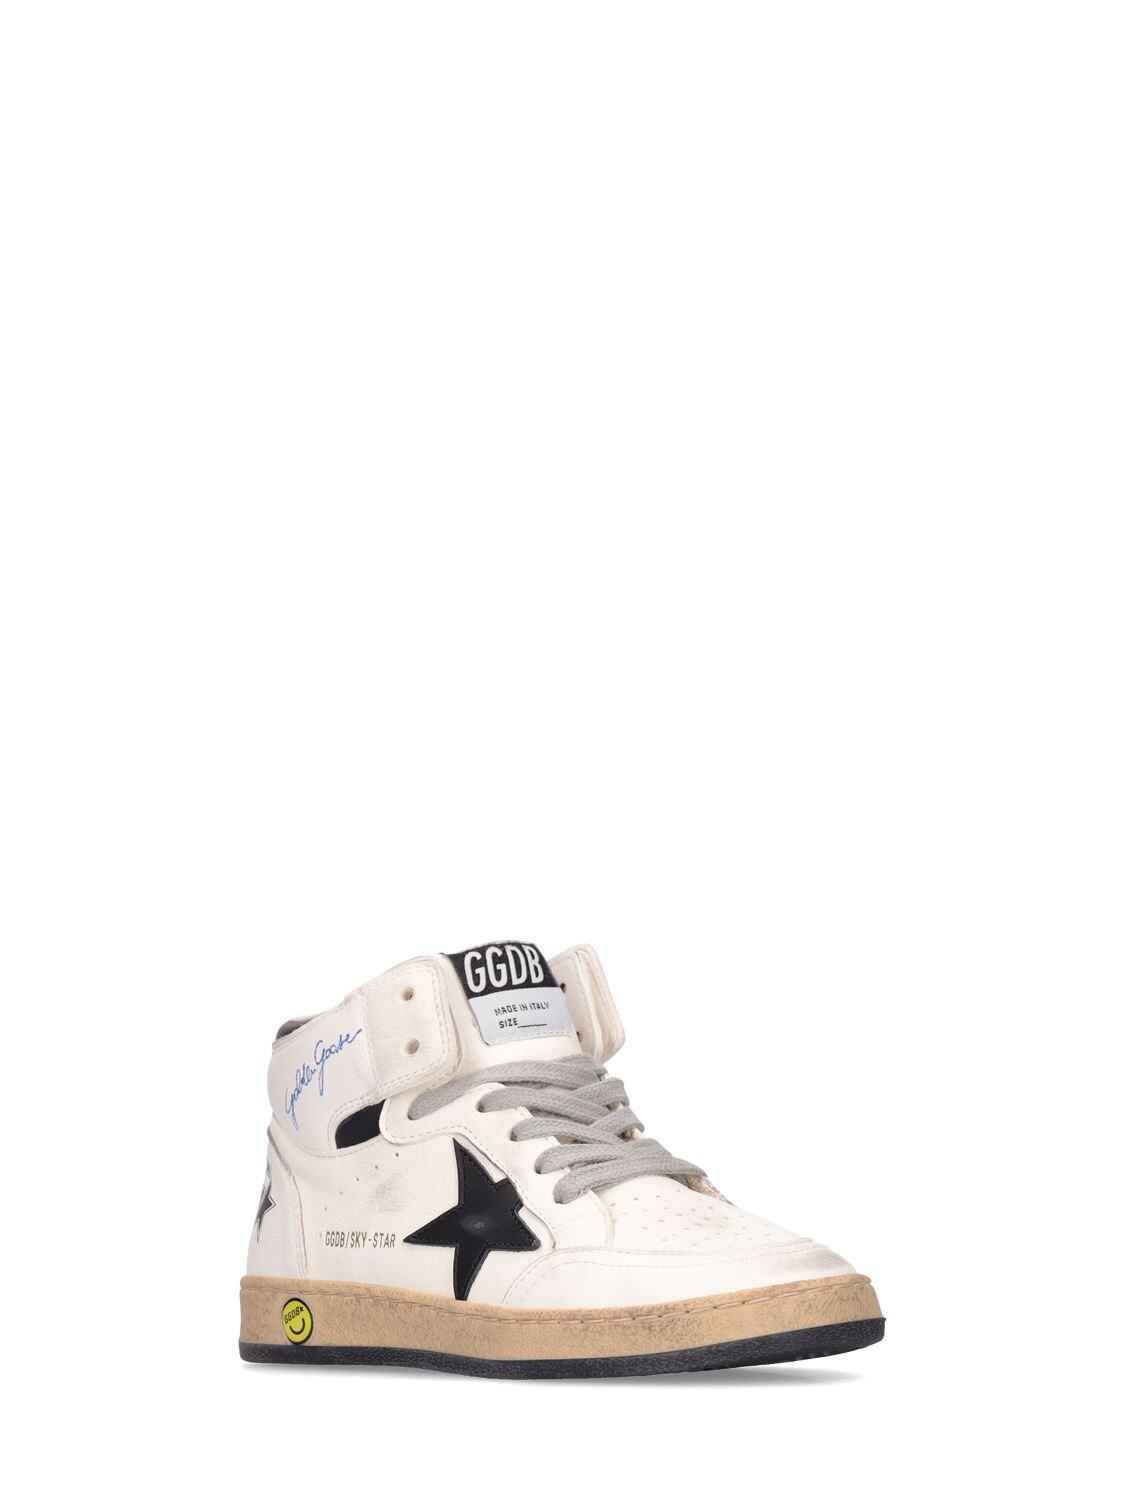 Shop Golden Goose Sky Star Leather Lace-up Sneakers In White